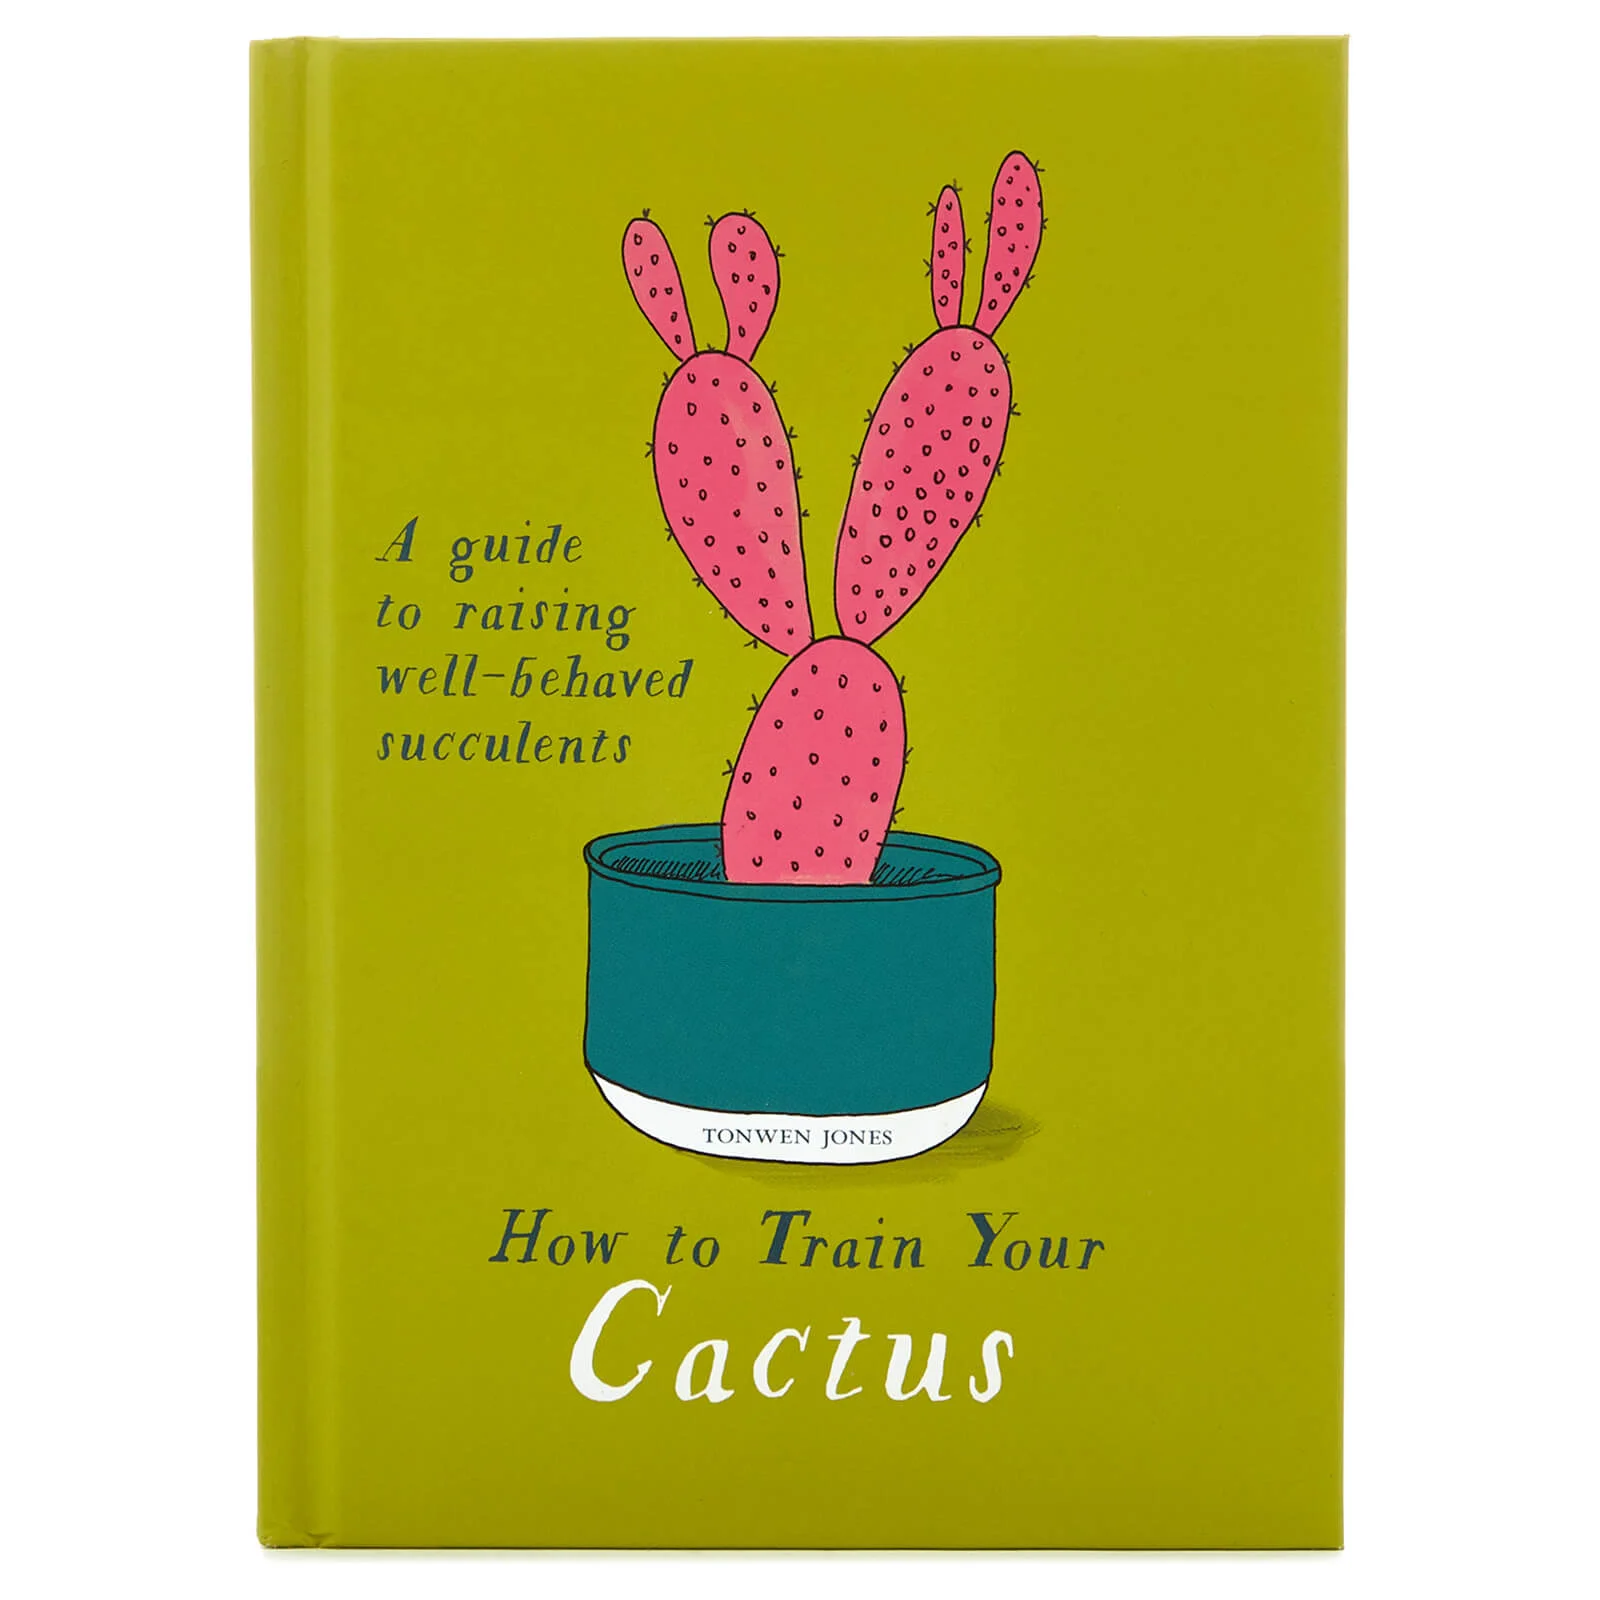 Modern Books: How to Train Your Cactus - A Guide to Raising Well - Behaved Succulents Image 1